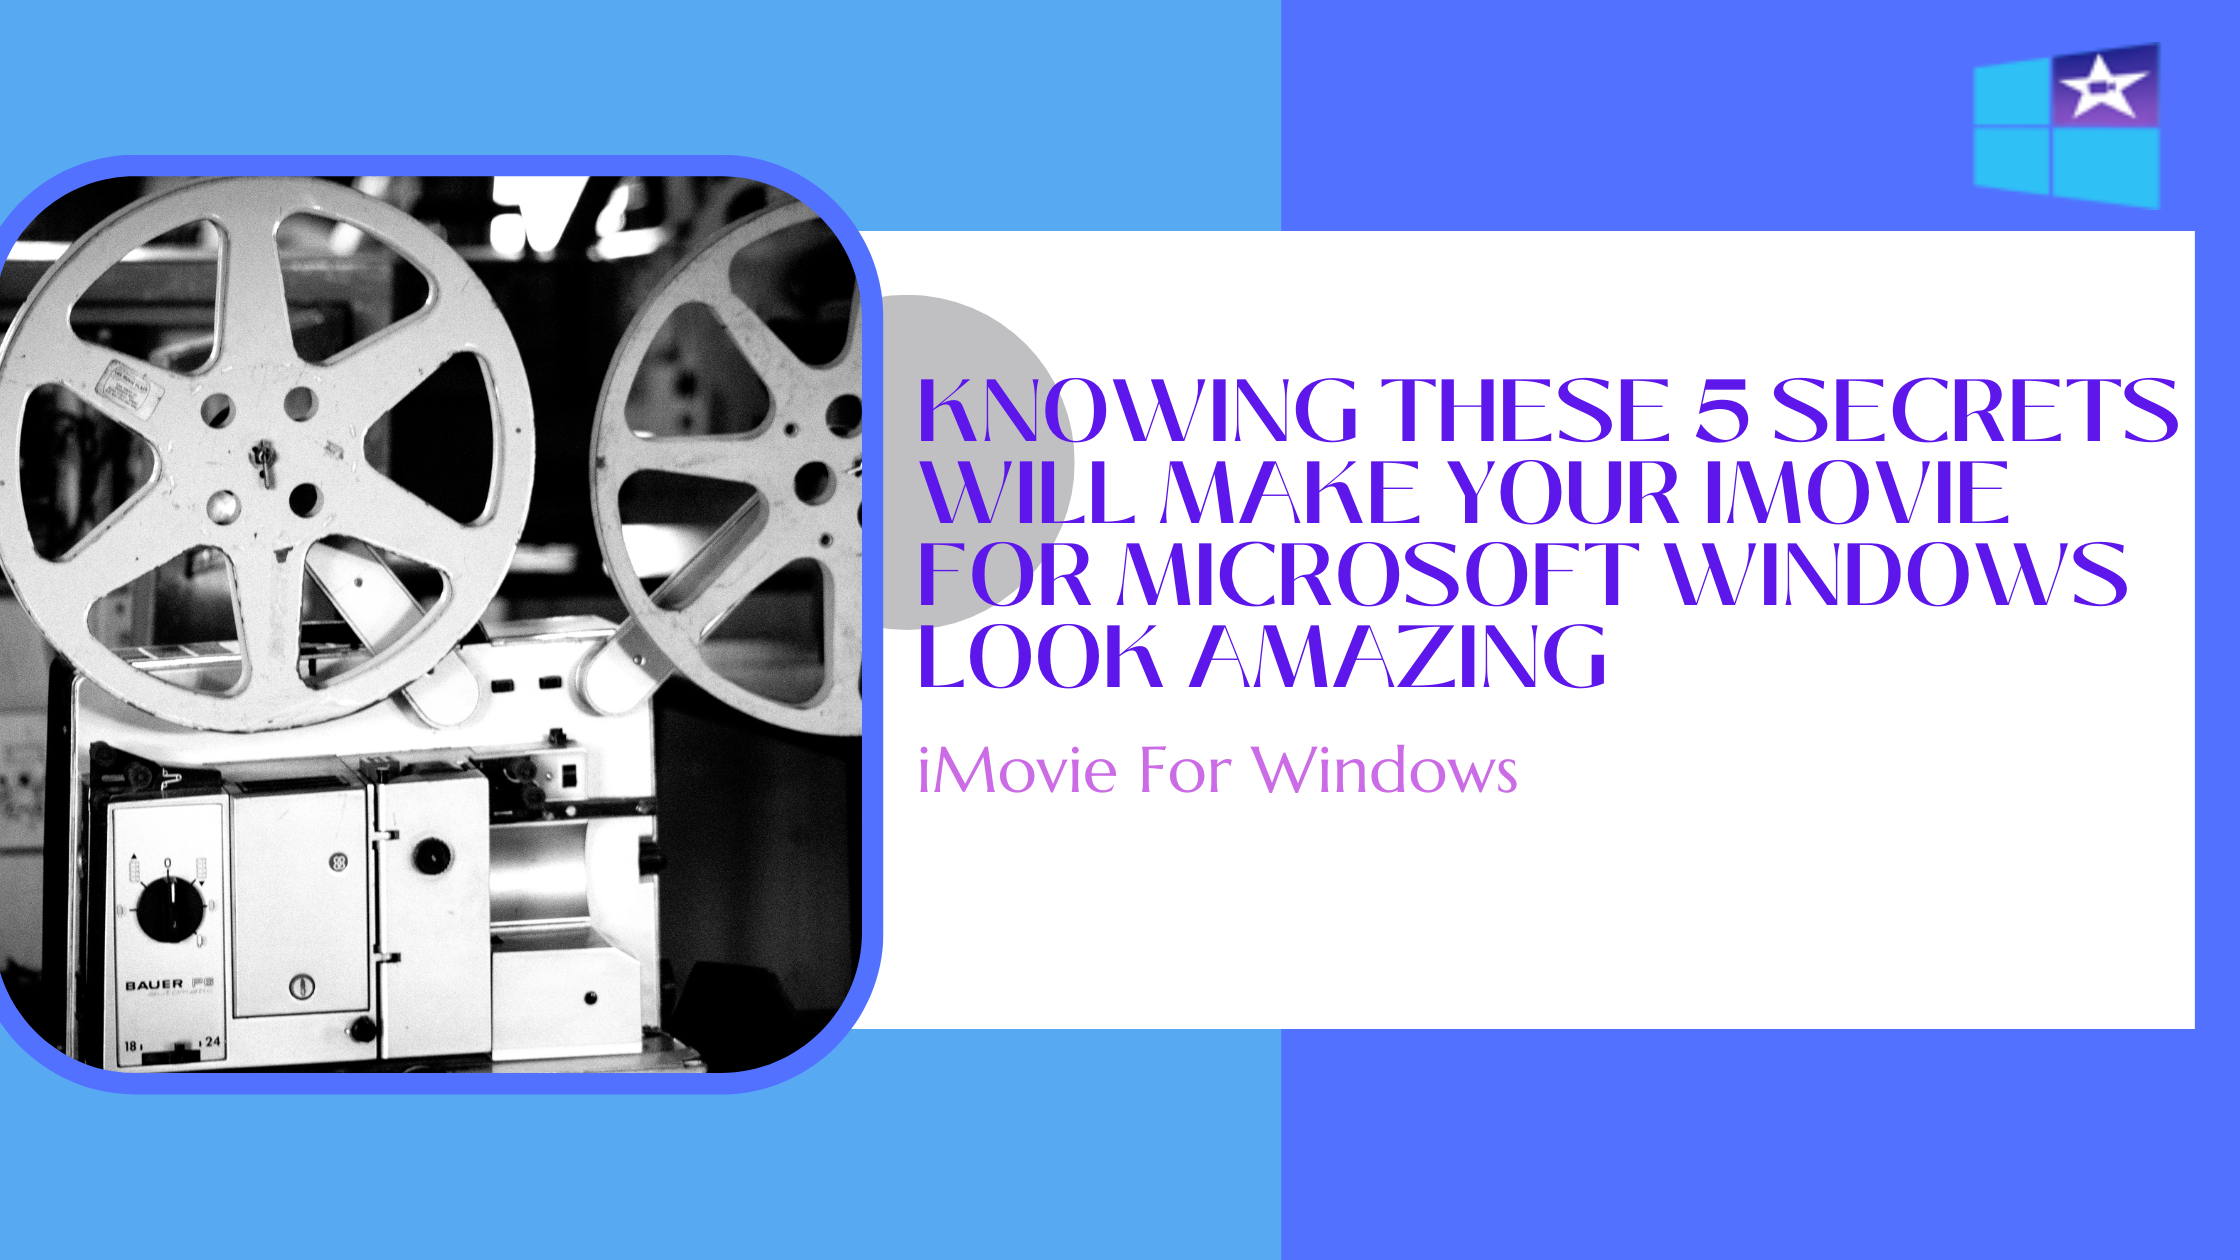 Knowing these 5 secrets will make your iMovie for Microsoft windows look amazing